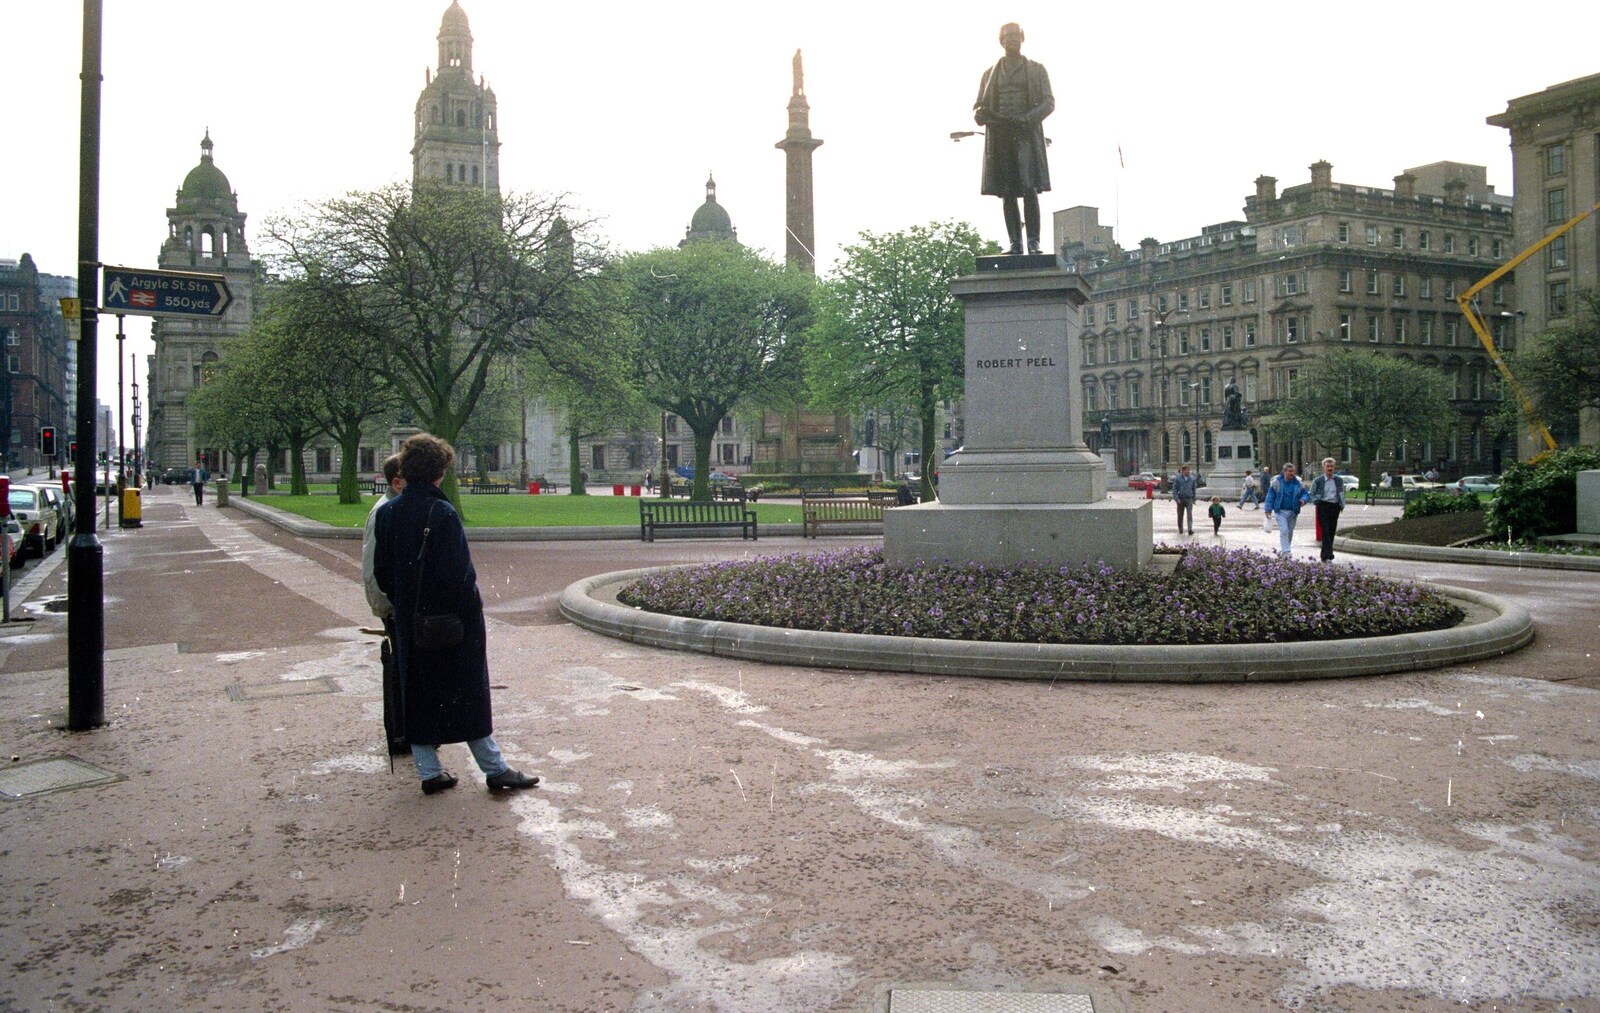 Uni: A Trip To Glasgow and Edinburgh, Scotland - 15th May 1989: Hamish and Angela by the Robert Peel memorial